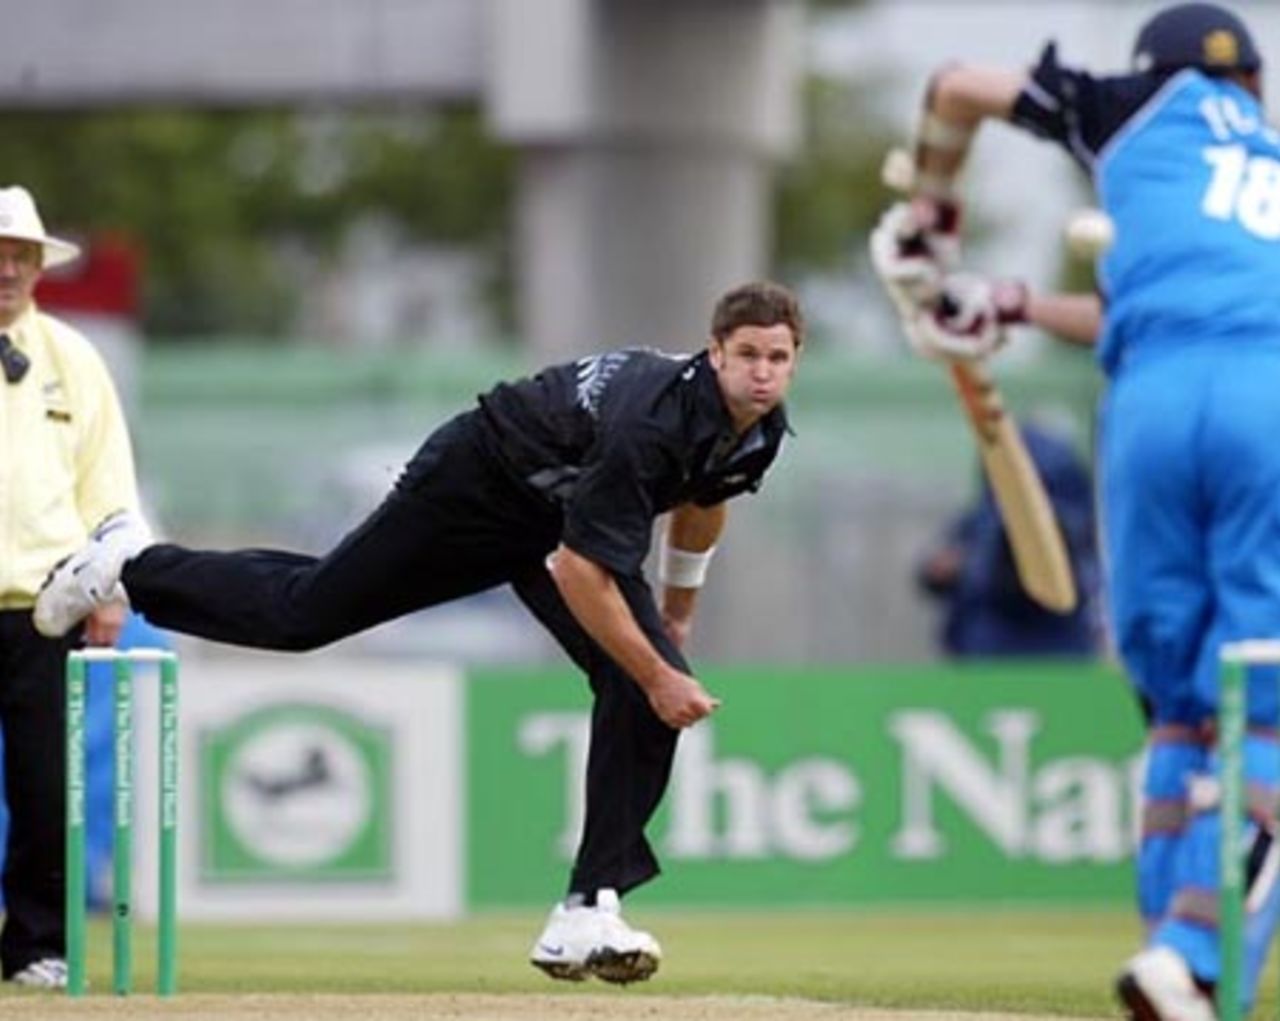 New Zealand bowler Chris Cairns delivers a short ball to England batsman James Foster down the leg side during his spell of 2-43 from nine overs. Umpire Evan Watkin looks on. 1st ODI: New Zealand v England at Jade Stadium, Christchurch, 13 February 2002.